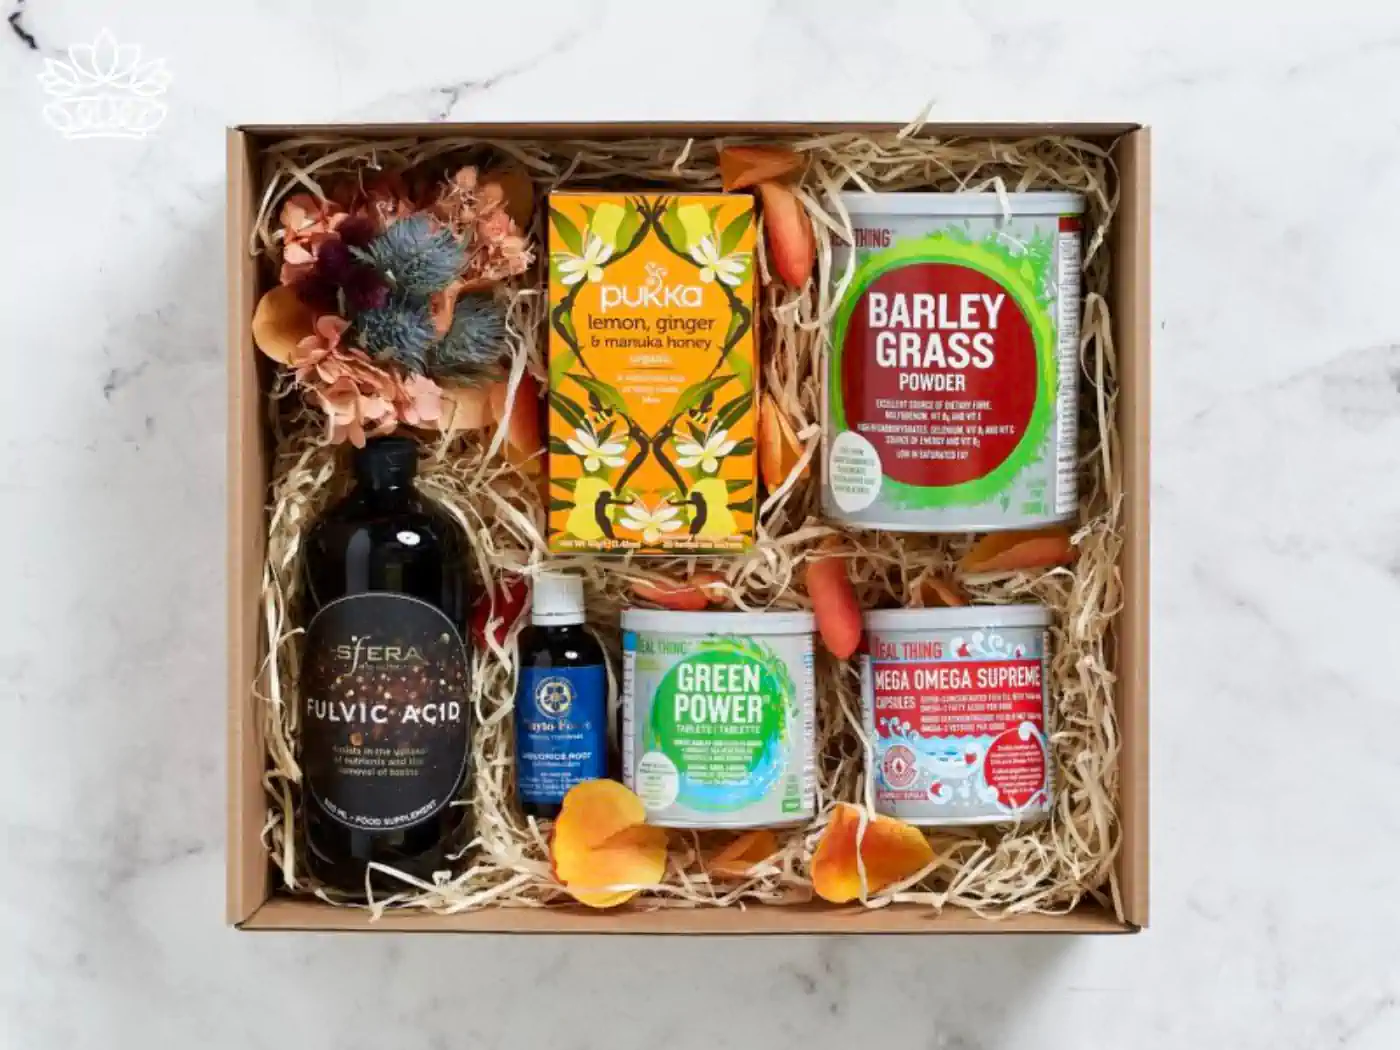 A curated wellness gift box containing Pukka lemon, ginger & manuka honey tea, Sfera Fulvic Acid, Barley Grass Powder, and Green Power supplements, arranged neatly with dried flowers in a straw-filled box. Guest House and Hotel Gift Boxes Delivered with Heart. Fabulous Flowers and Gifts